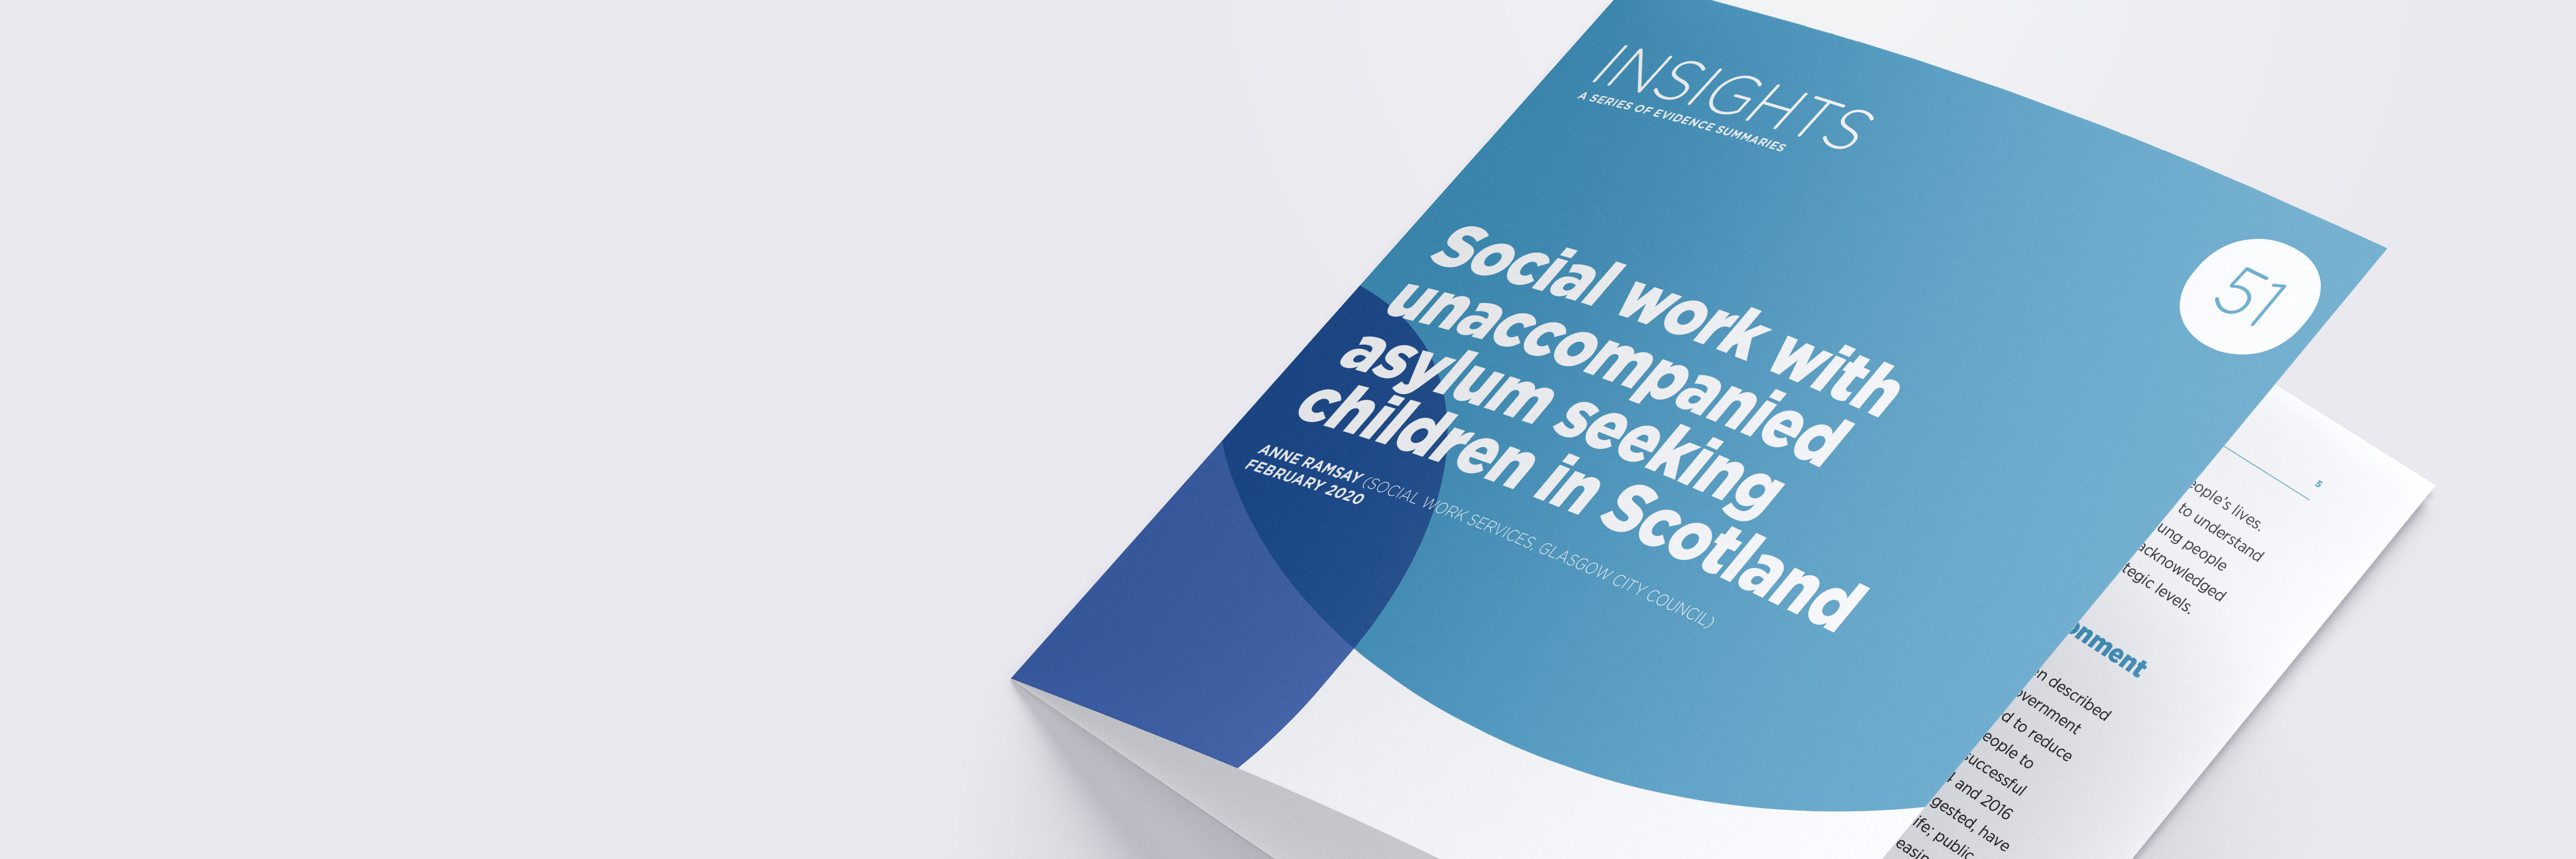 Social pedagogy and its relevance for Scottish social welfare book covers